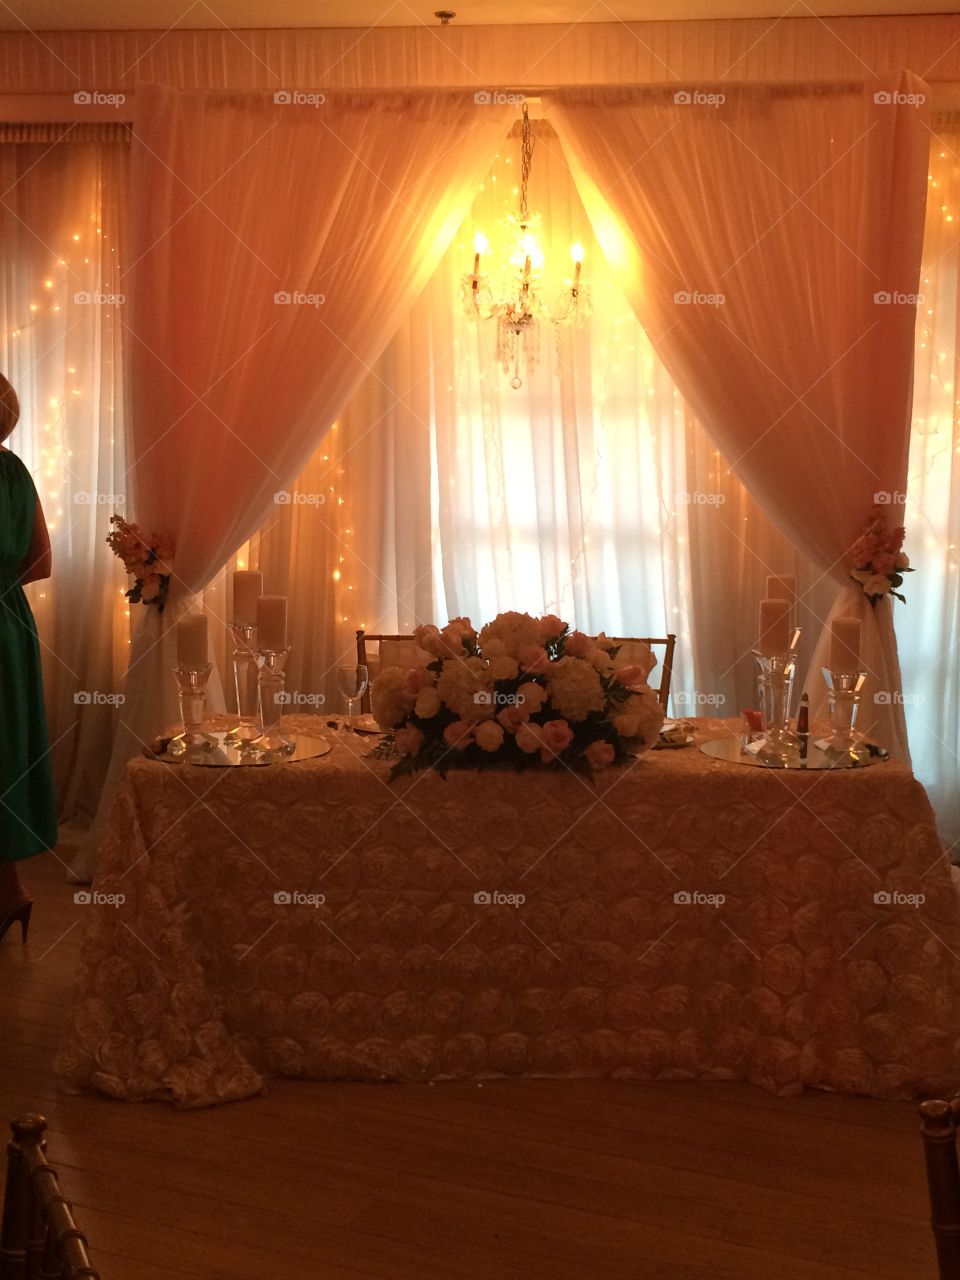 Bride and Groom. Bride and Groom table